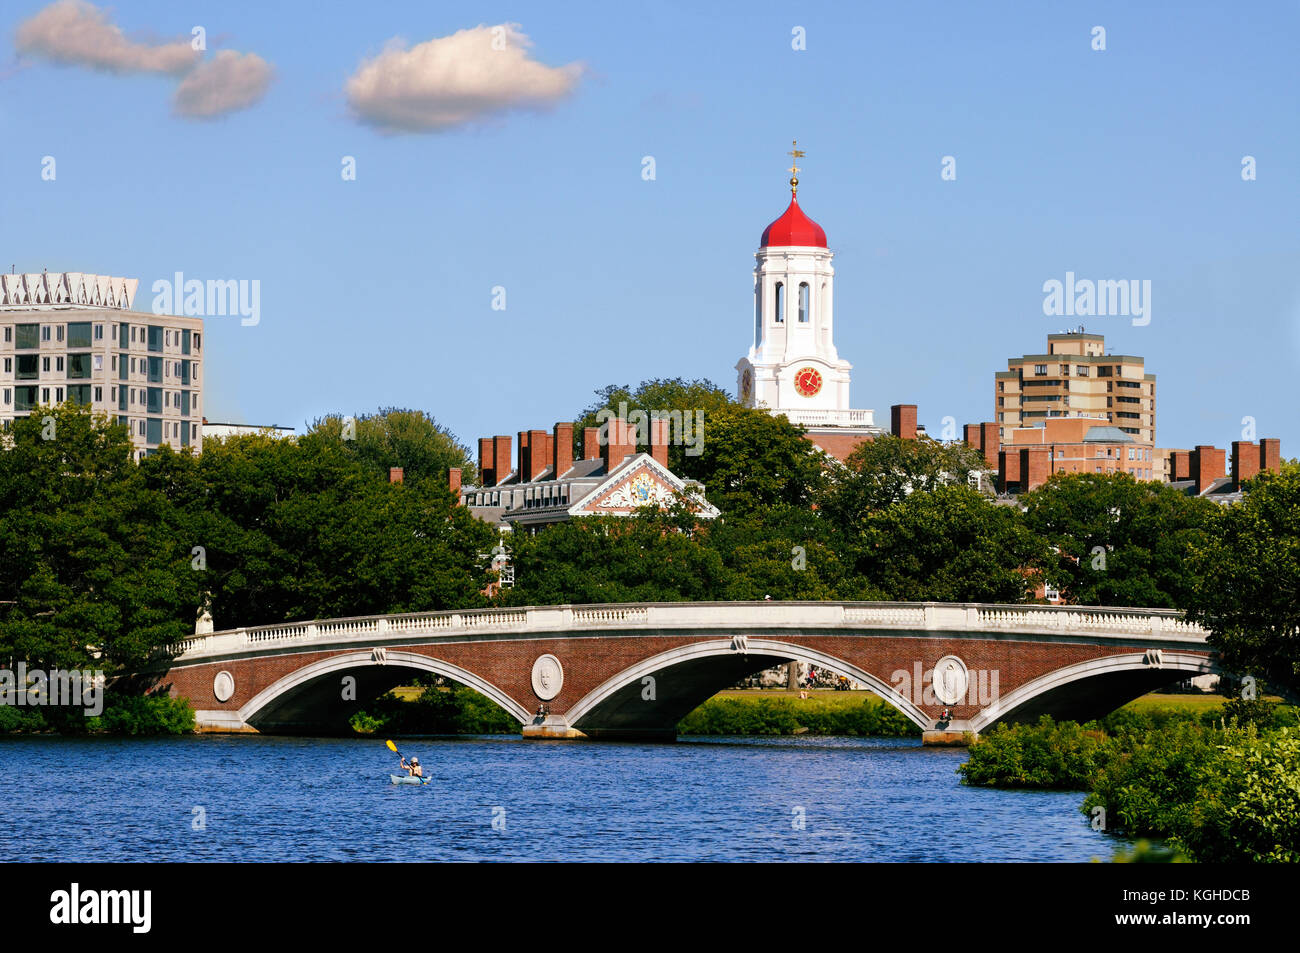 Footbridge connecting Harvard University campus across Charles River. Red dome and white clock tower of Dunster House in the background. Stock Photo